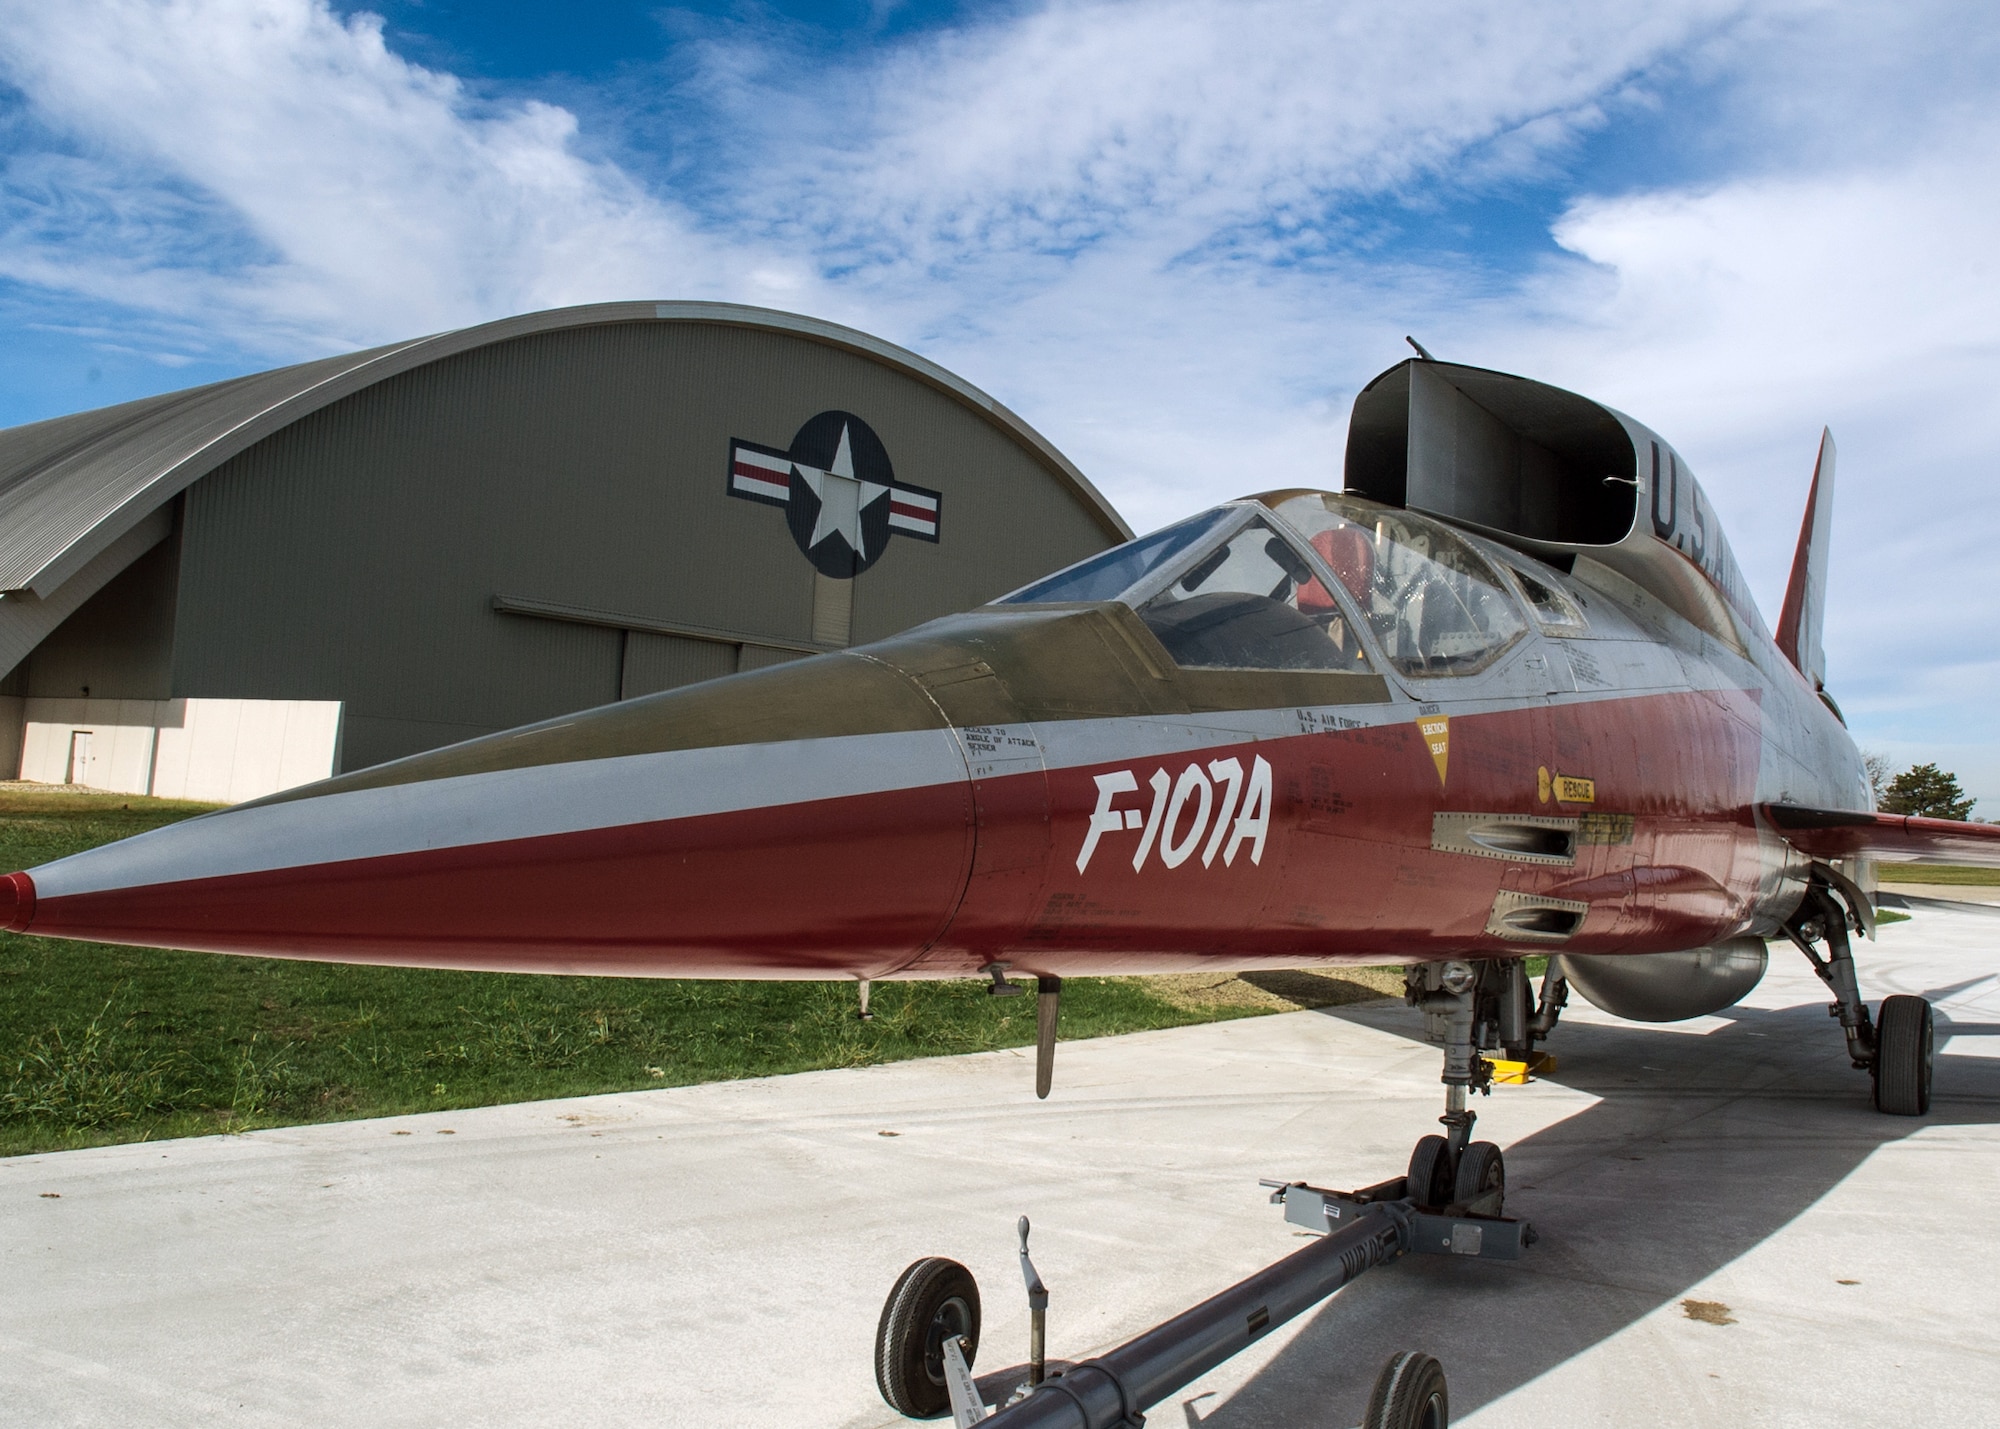 Restoration staff move the North American F-107A into the new fourth building at the National Museum of the U.S. Air Force on Oct. 6, 2015. (U.S. Air Force photo by Ken LaRock)